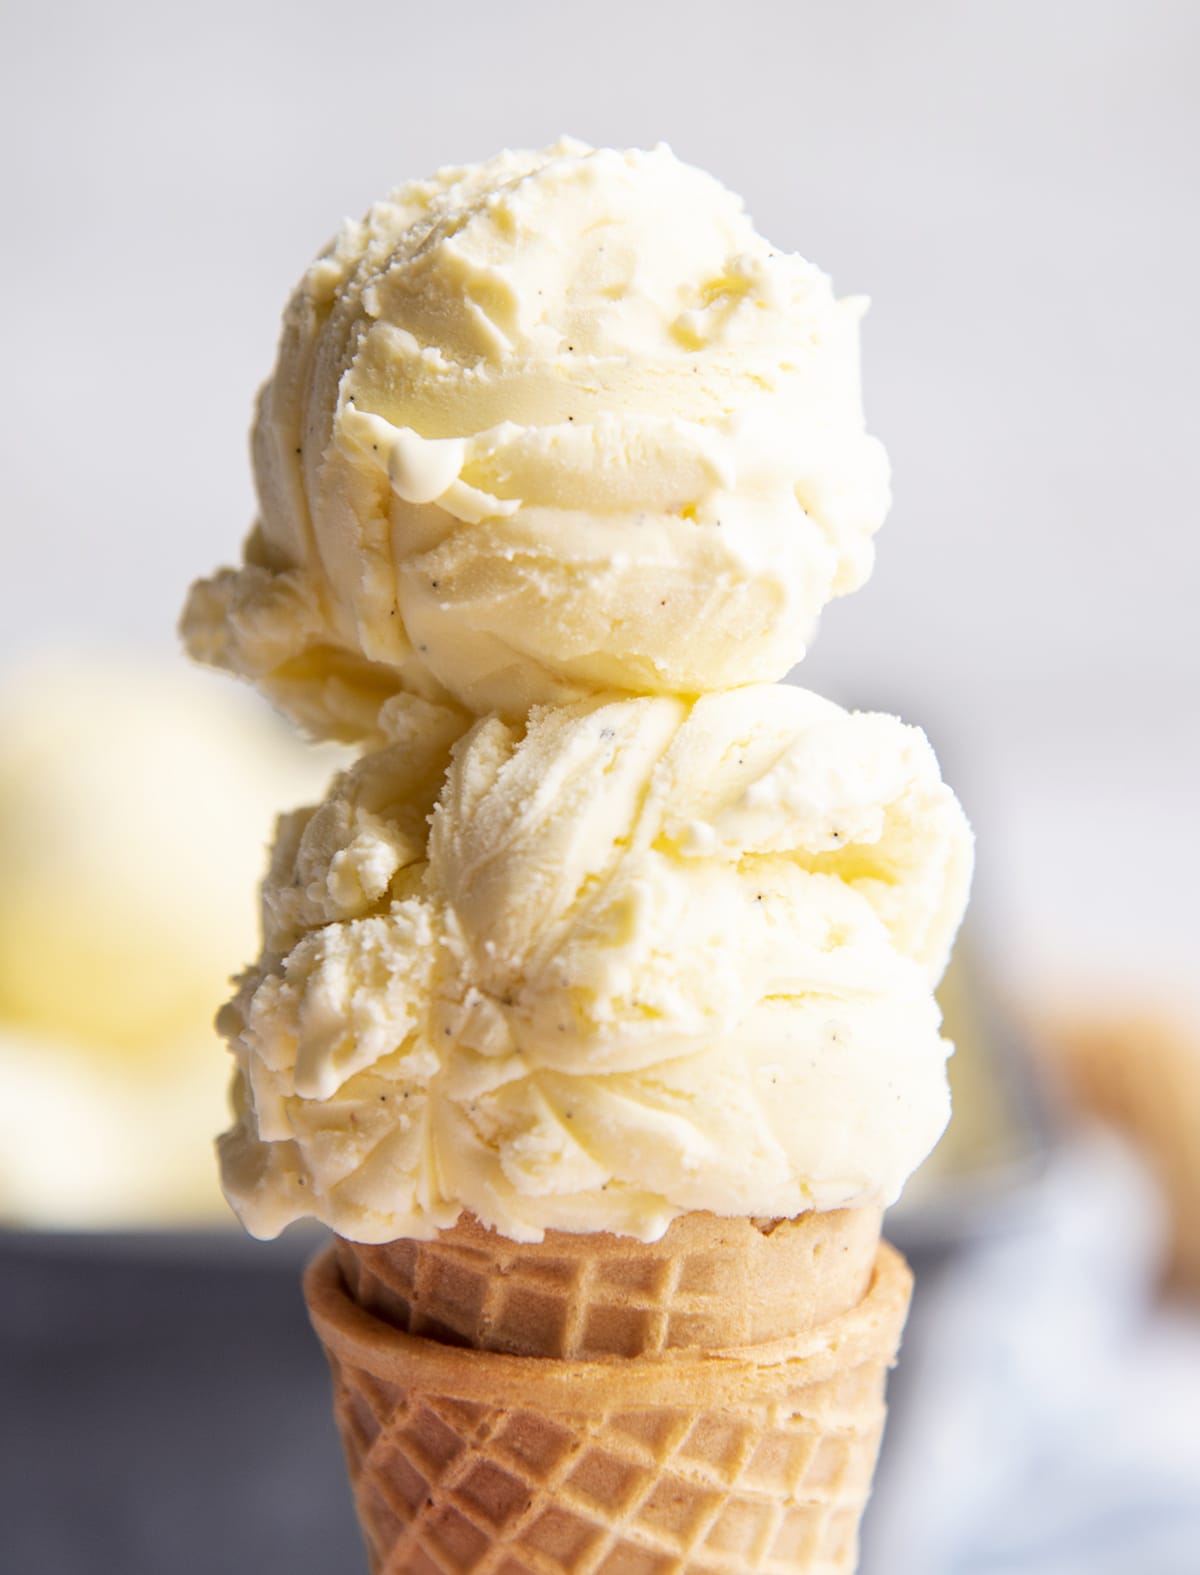 A close up of a french vanilla ice cream cone with two scoops on top.